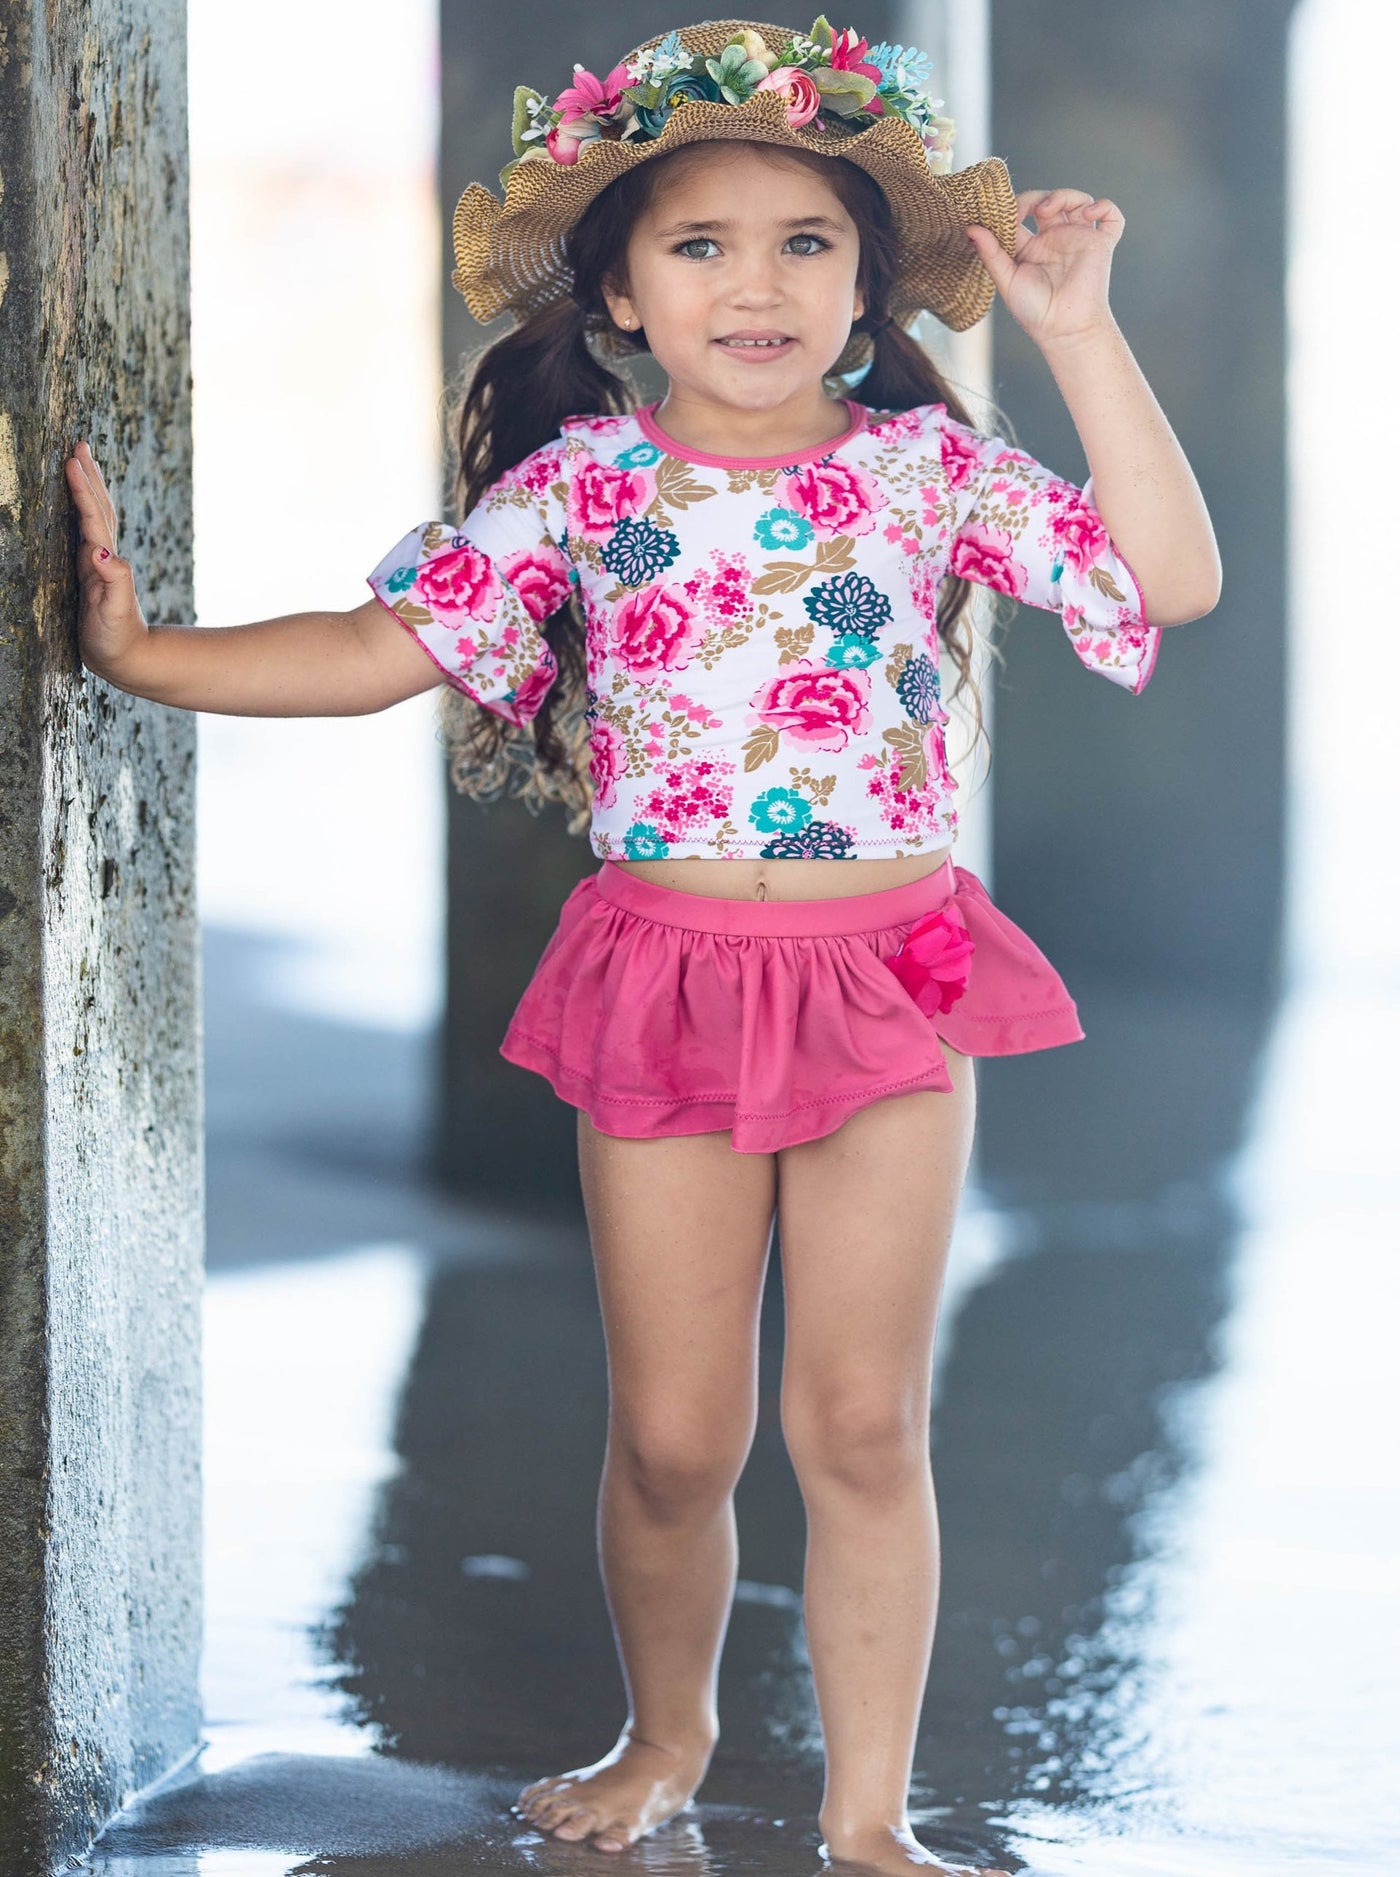 Kids Swimsuits | Little Girls Floral Rash Guard Two-Piece Swimsuit ...